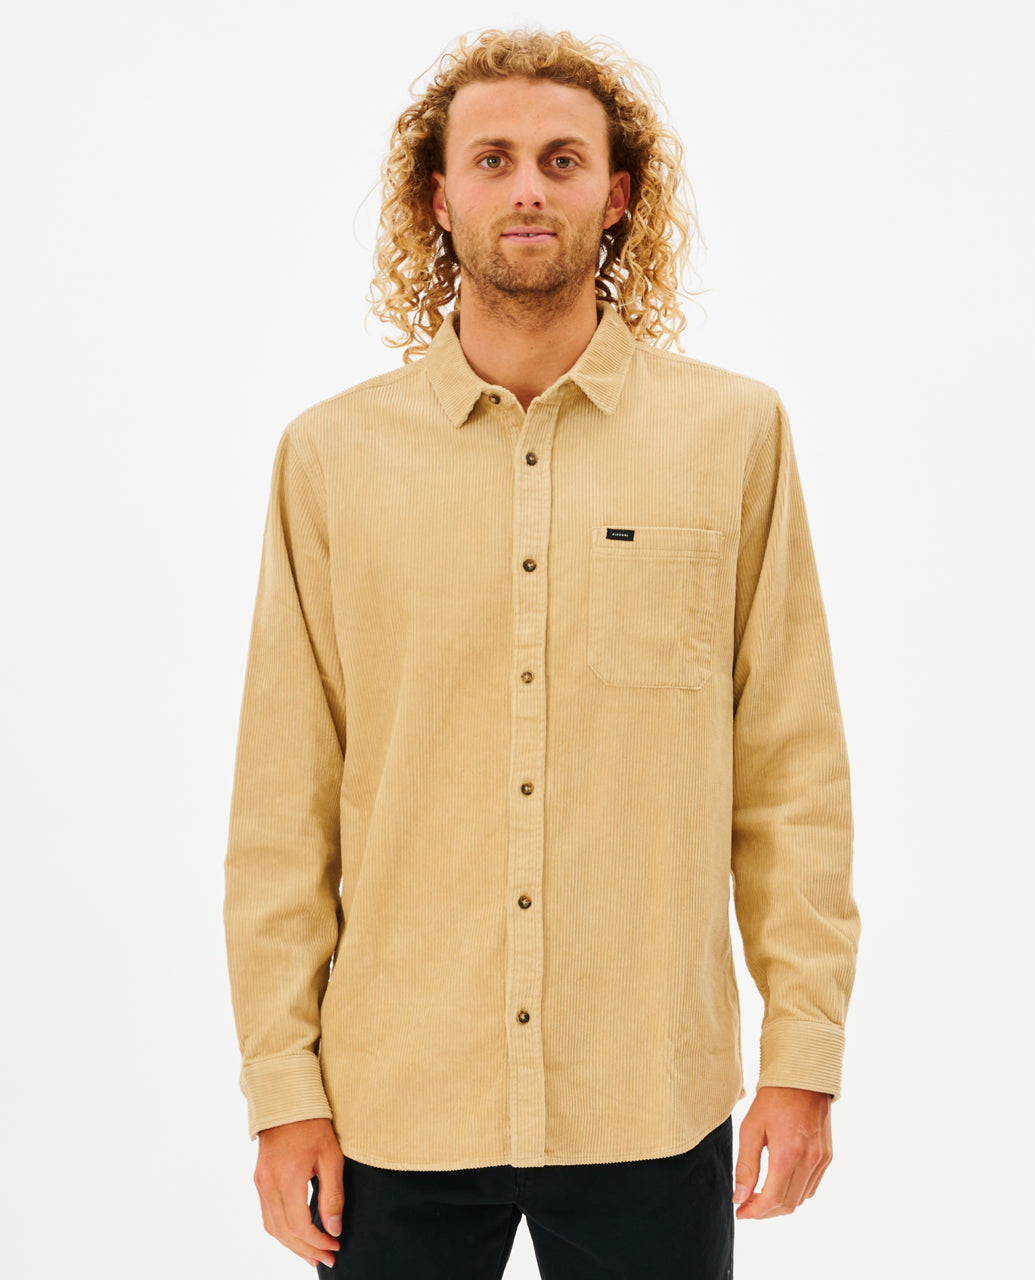 STATE CORD L/S SHIRT